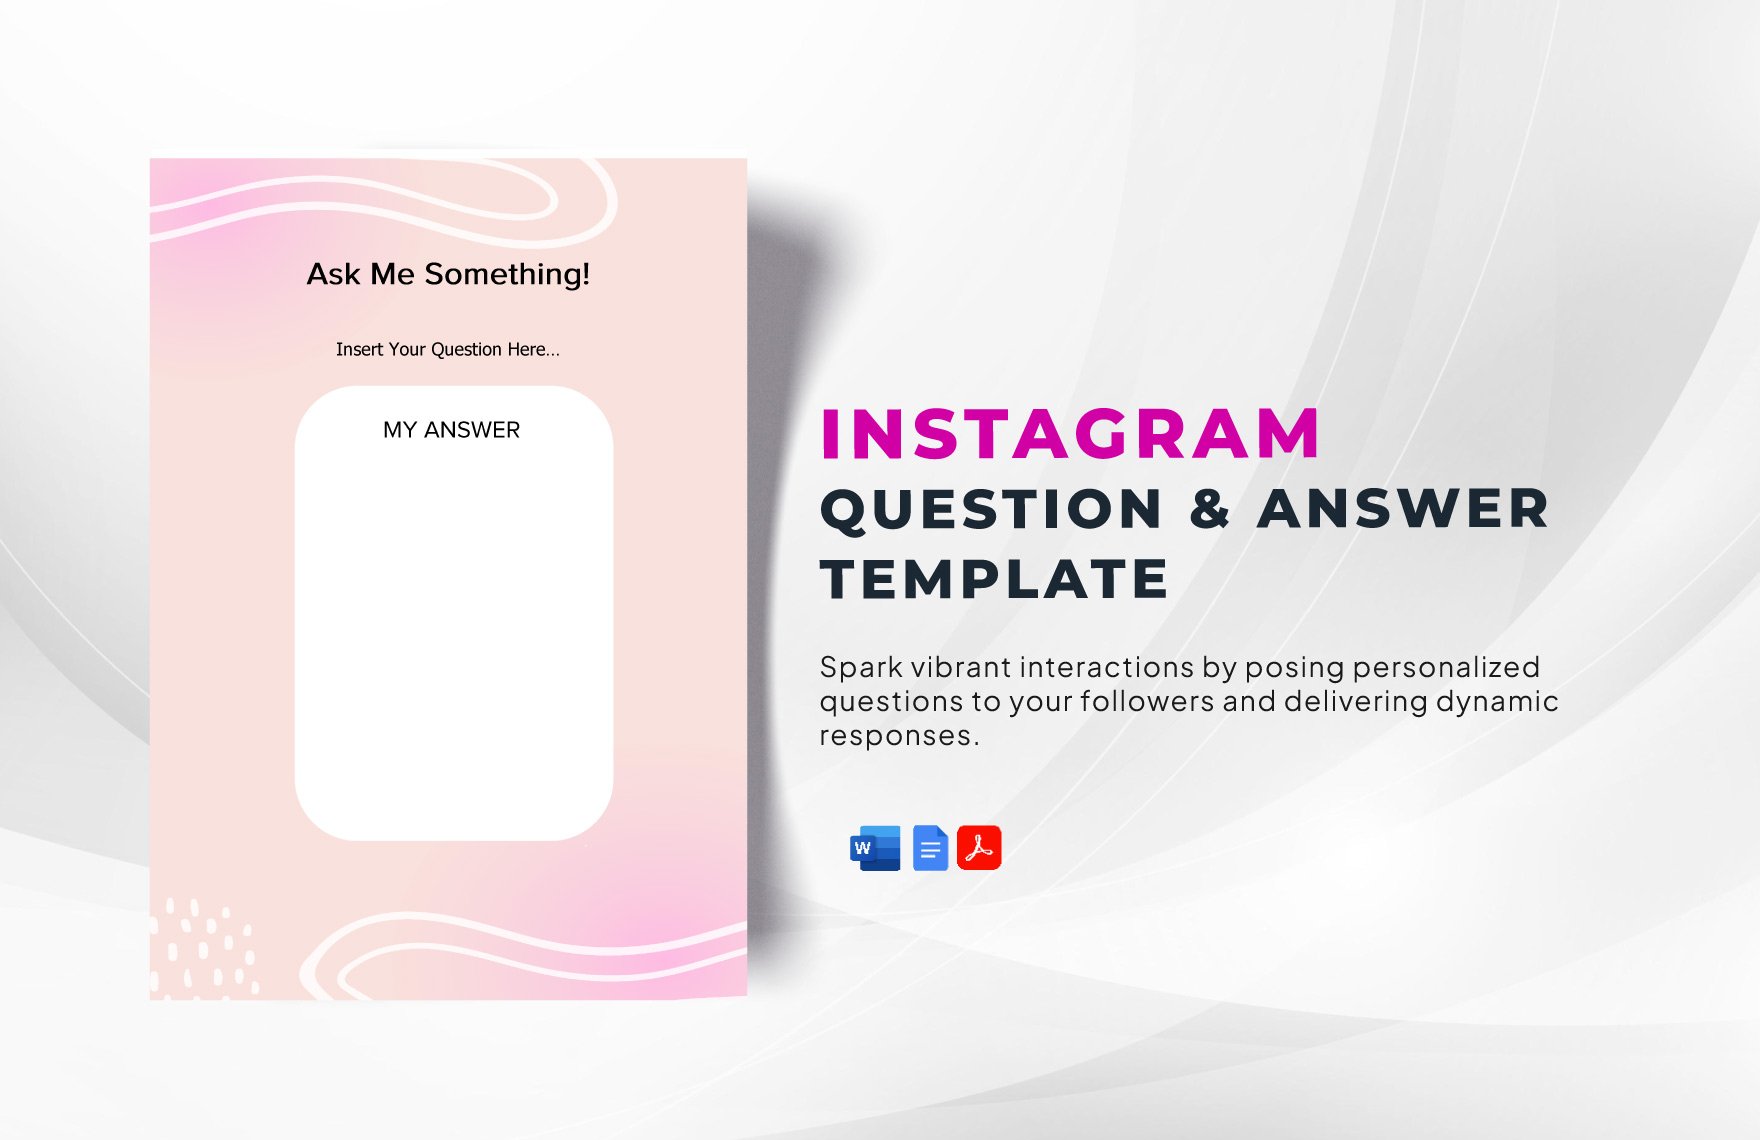 Instagram Question & Answer Template